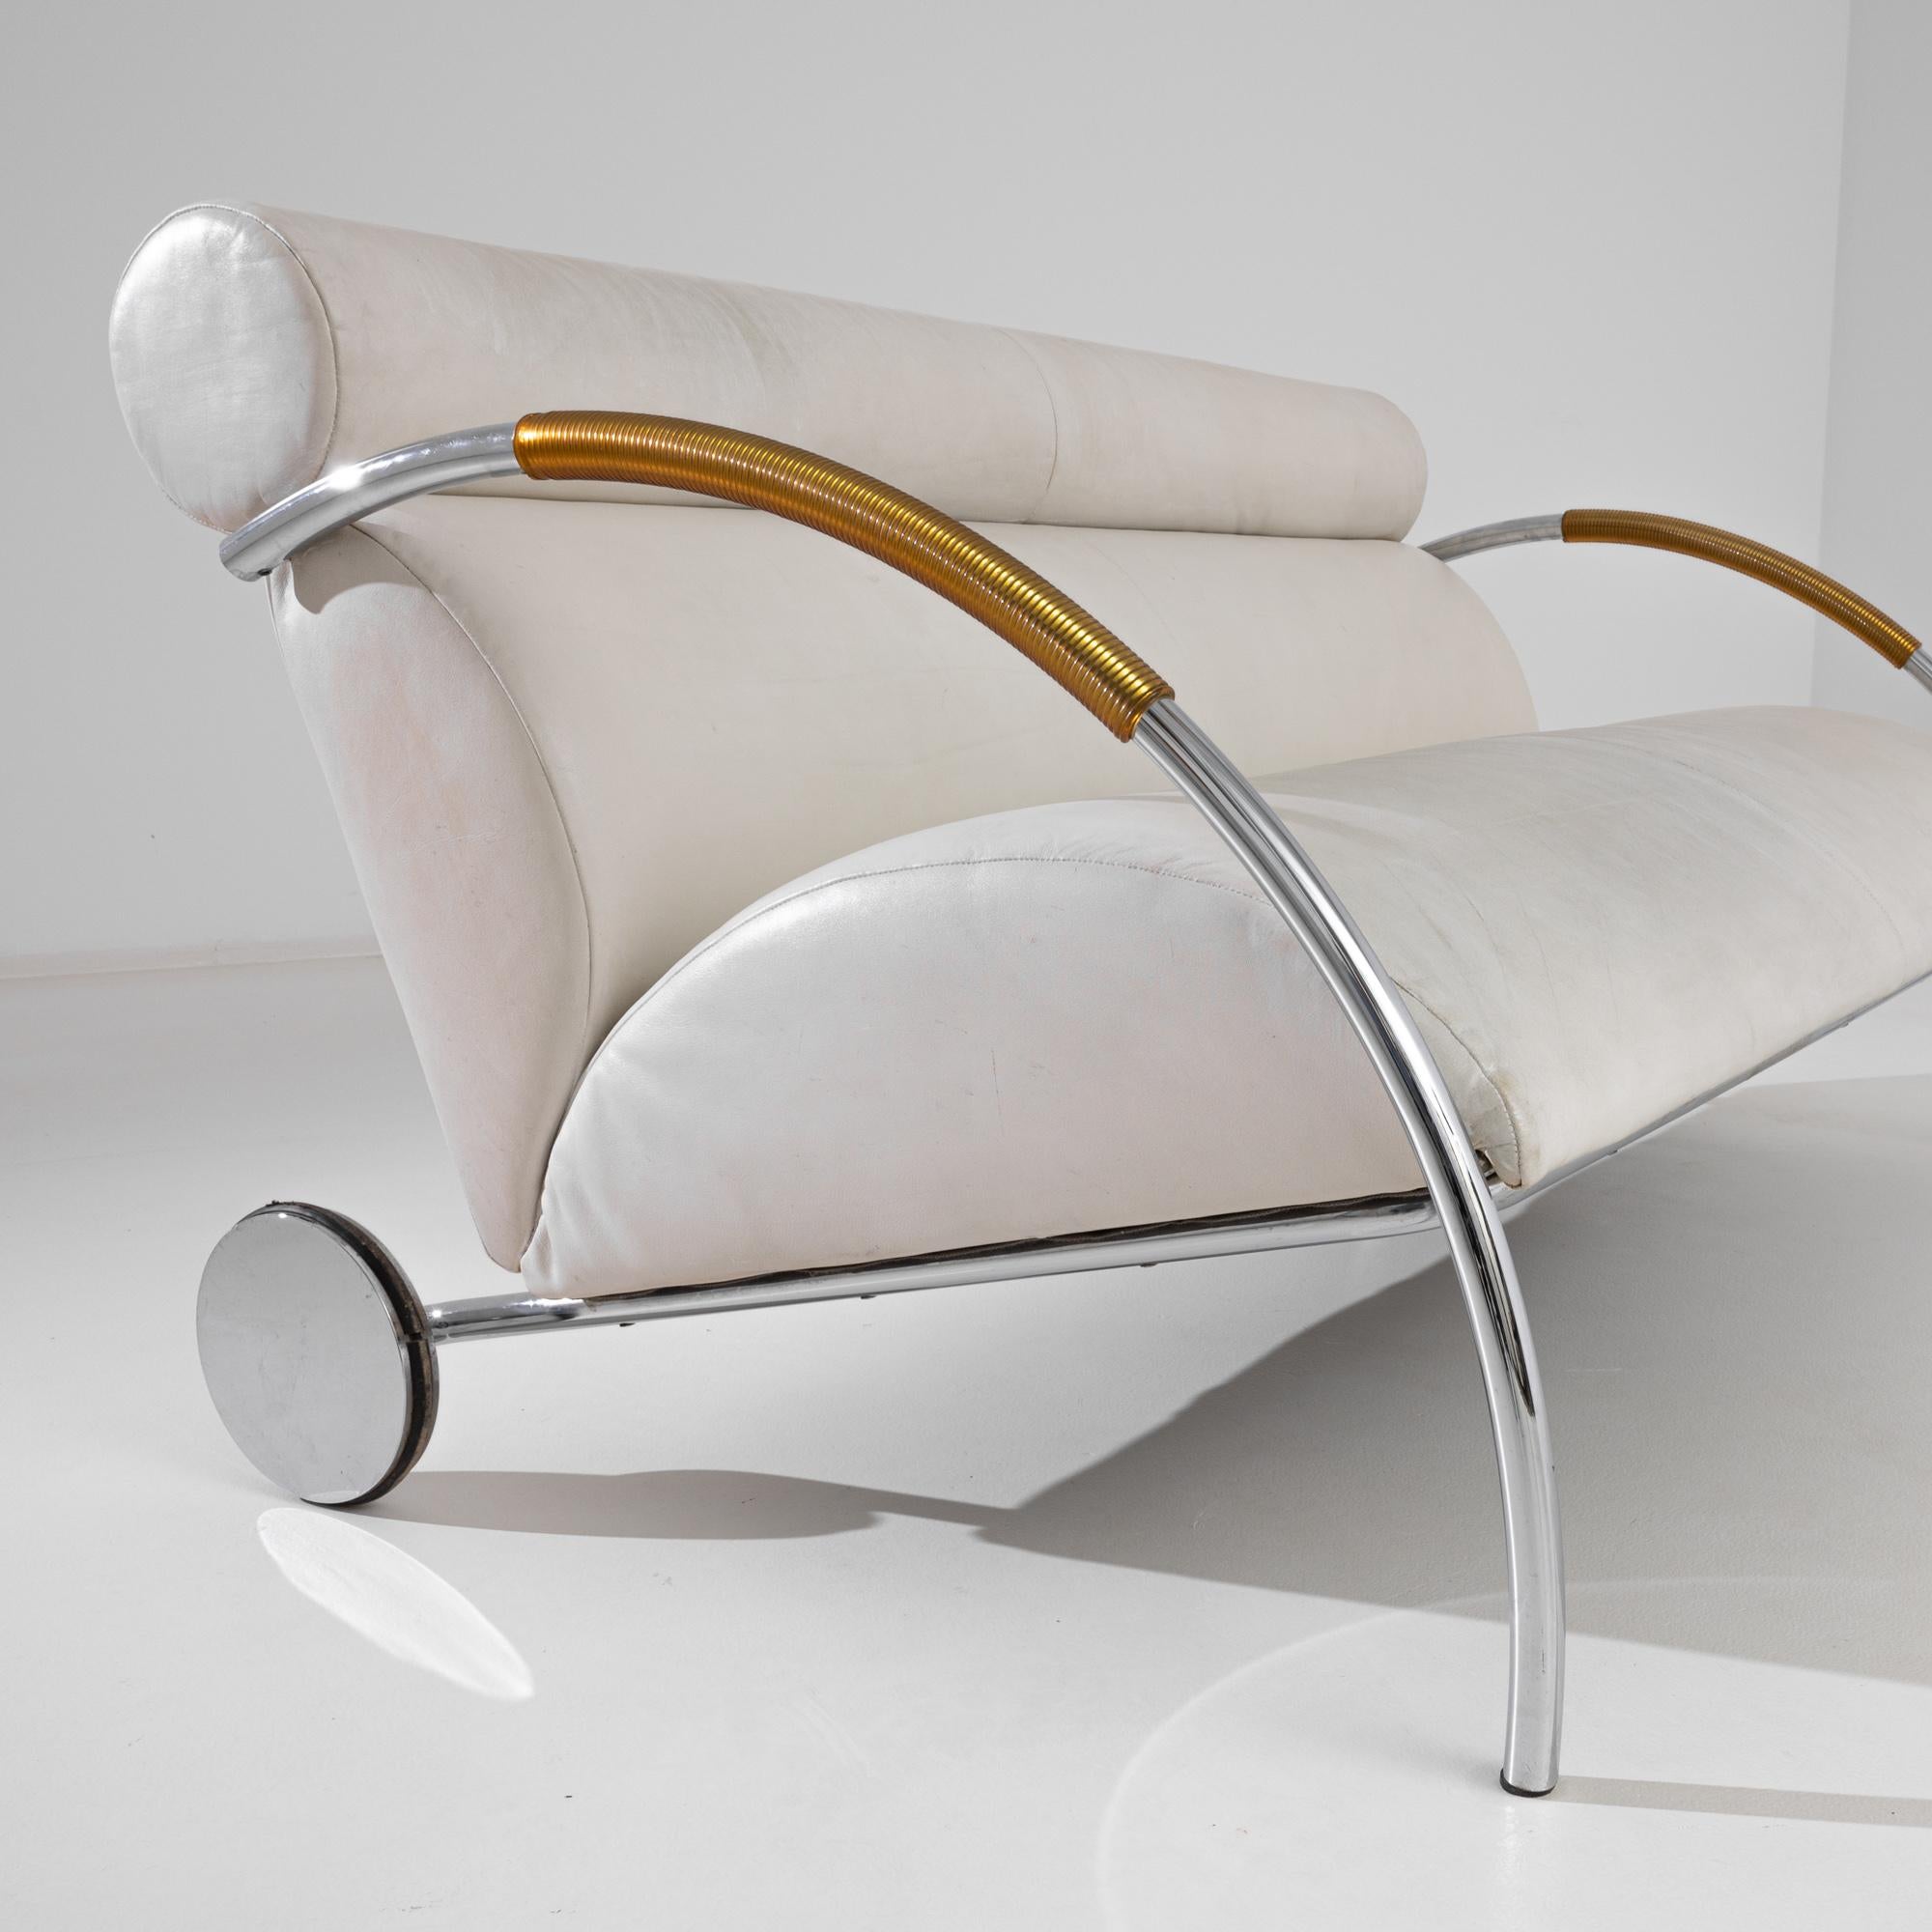 1980s, Postmodern Sofa by Peter Maly 1